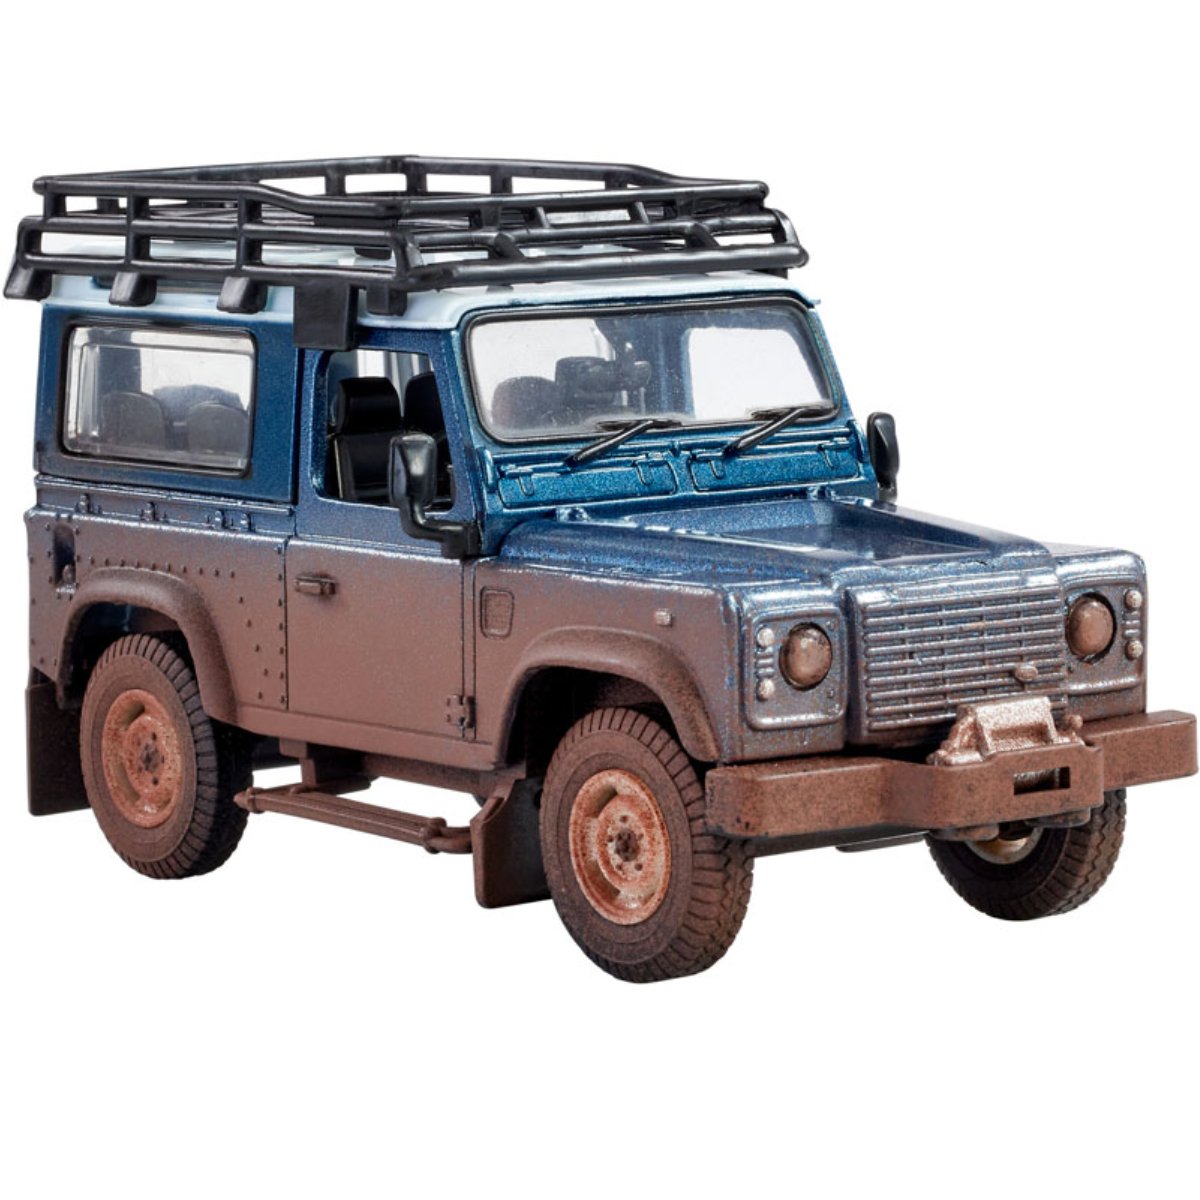 Britains Muddy Land Rover Defender - 1:32 Scale - Phillips Hobbies